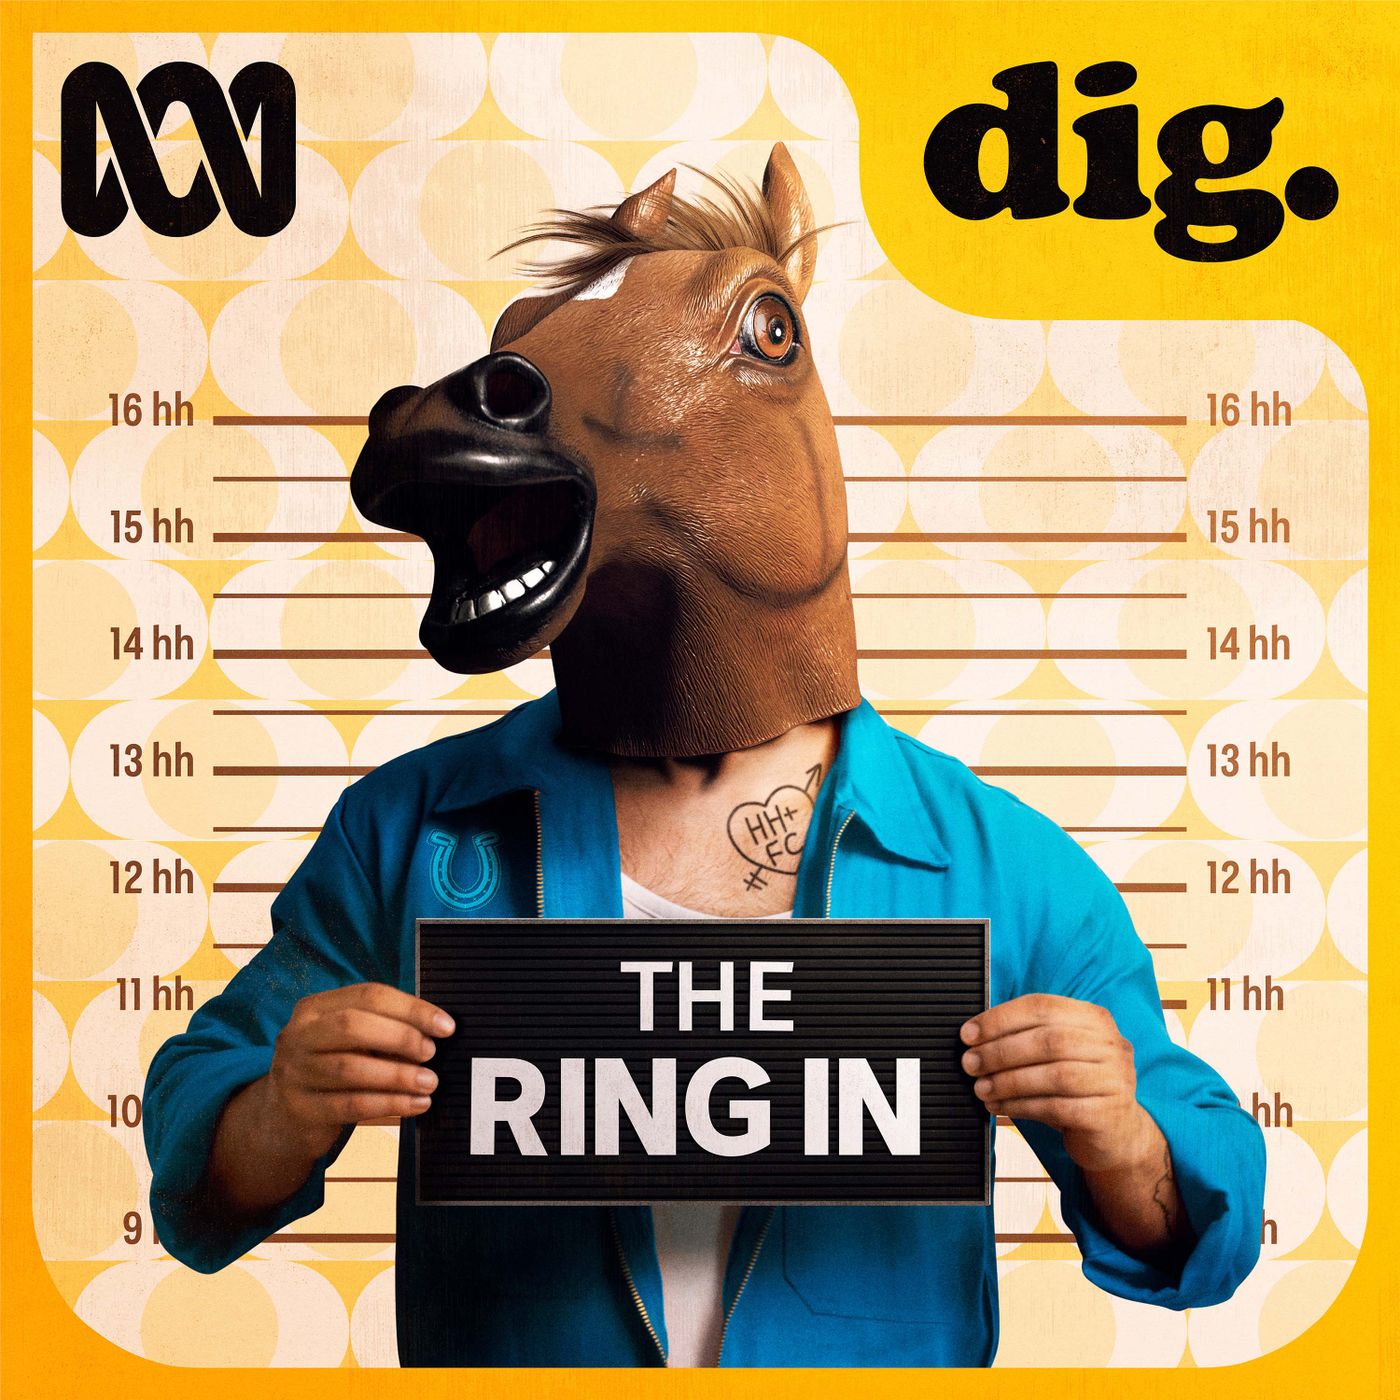 01 | The Ring In - My Friends Call Me Haitch